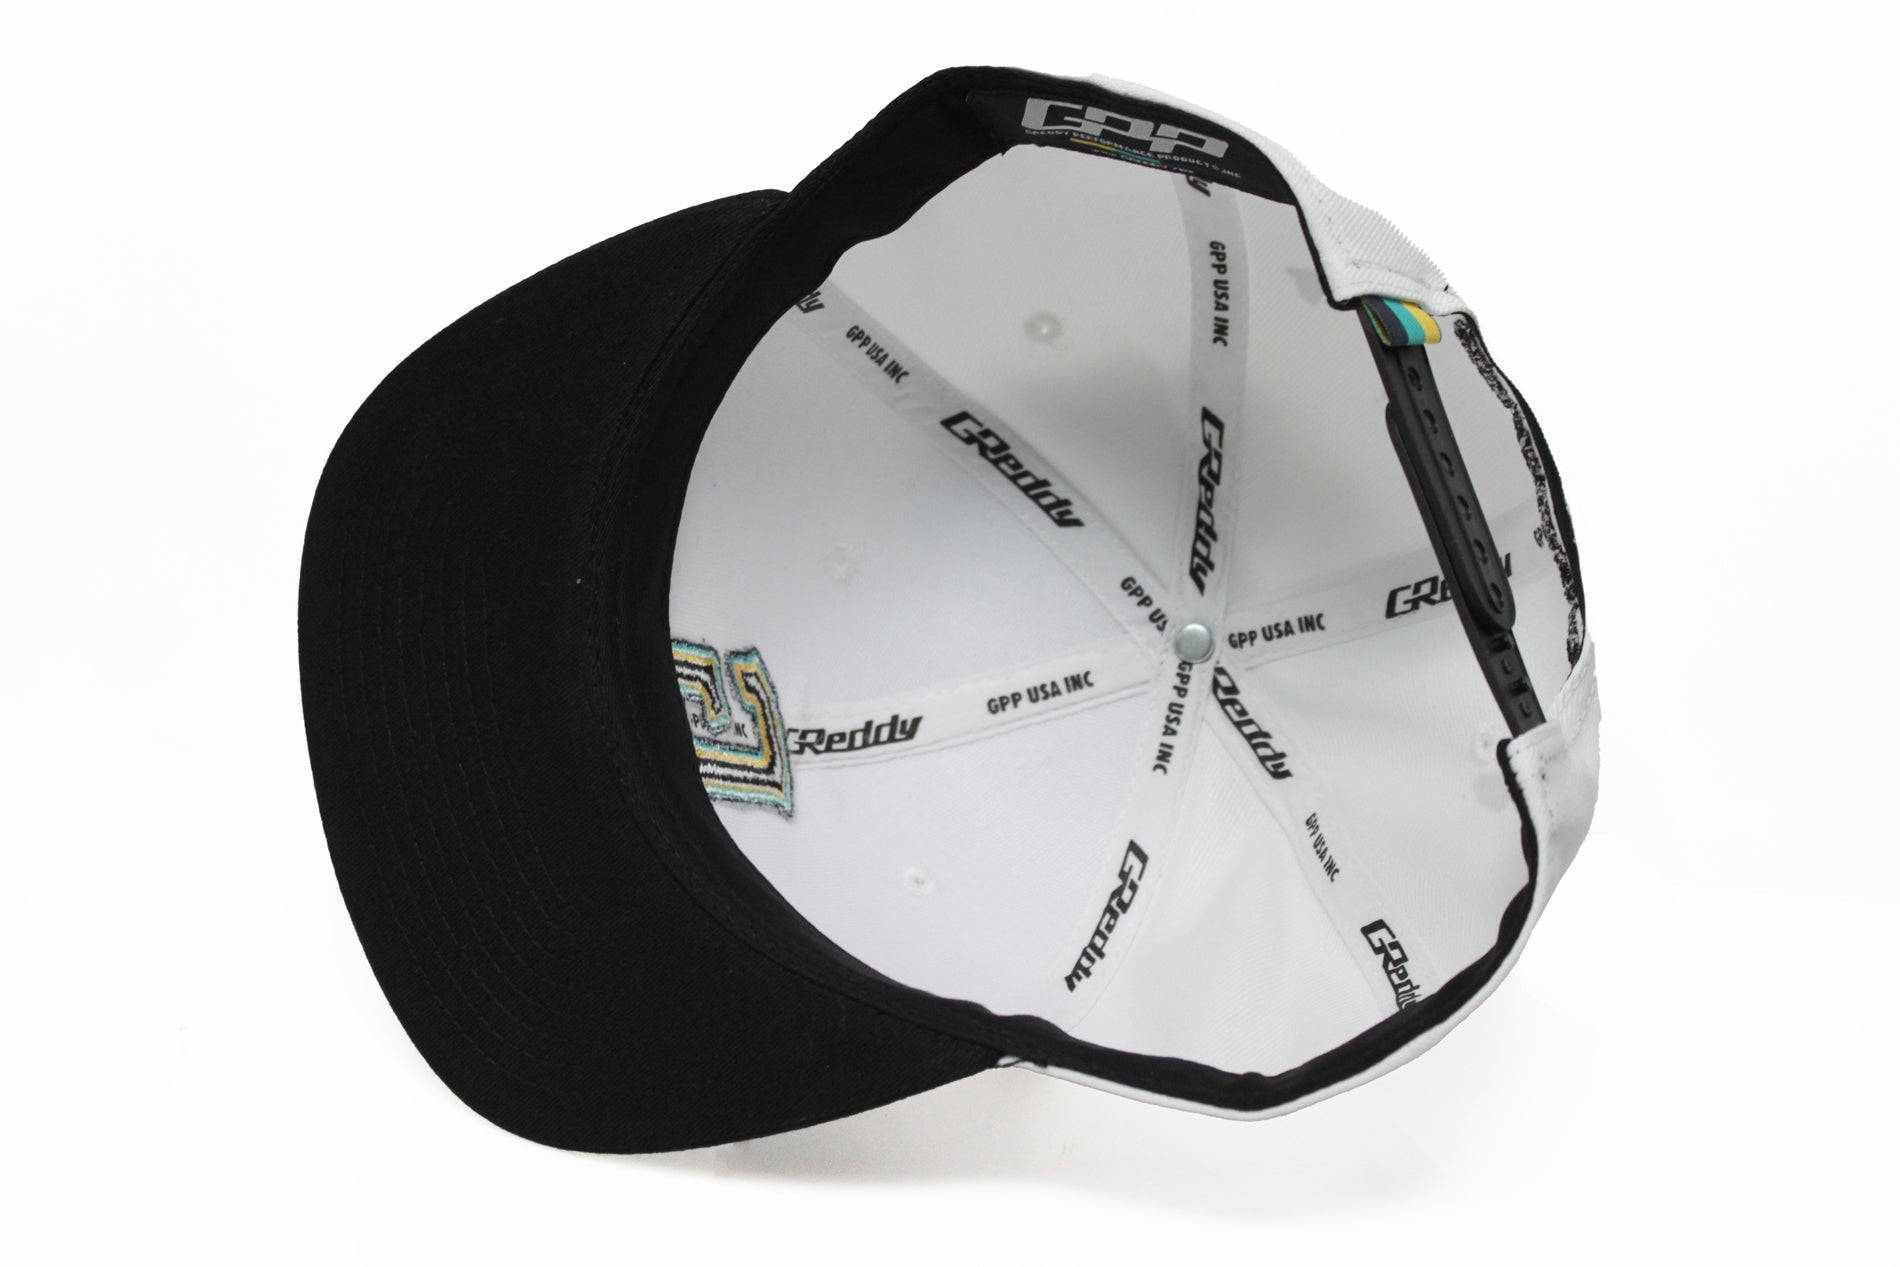 GReddy 3-Color "G" Snap-Back Cap - White and Black